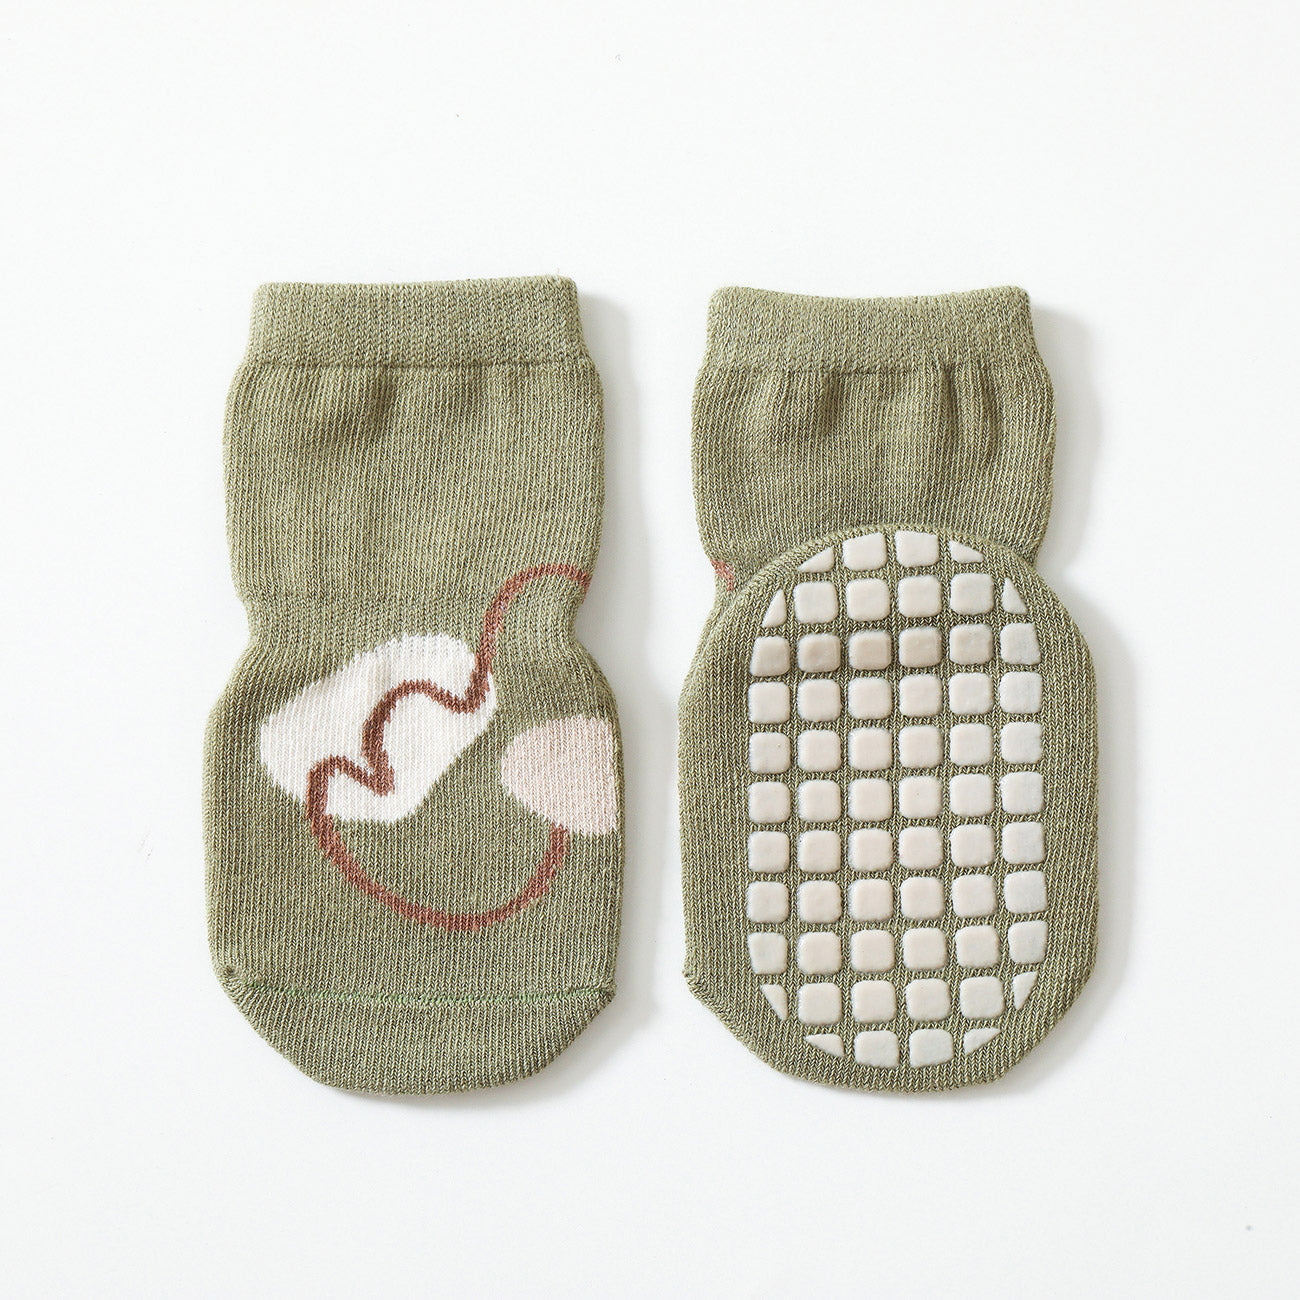 The Countryside- 4 Pairs of Stay-On Baby & Toddler Non-Slip Socks